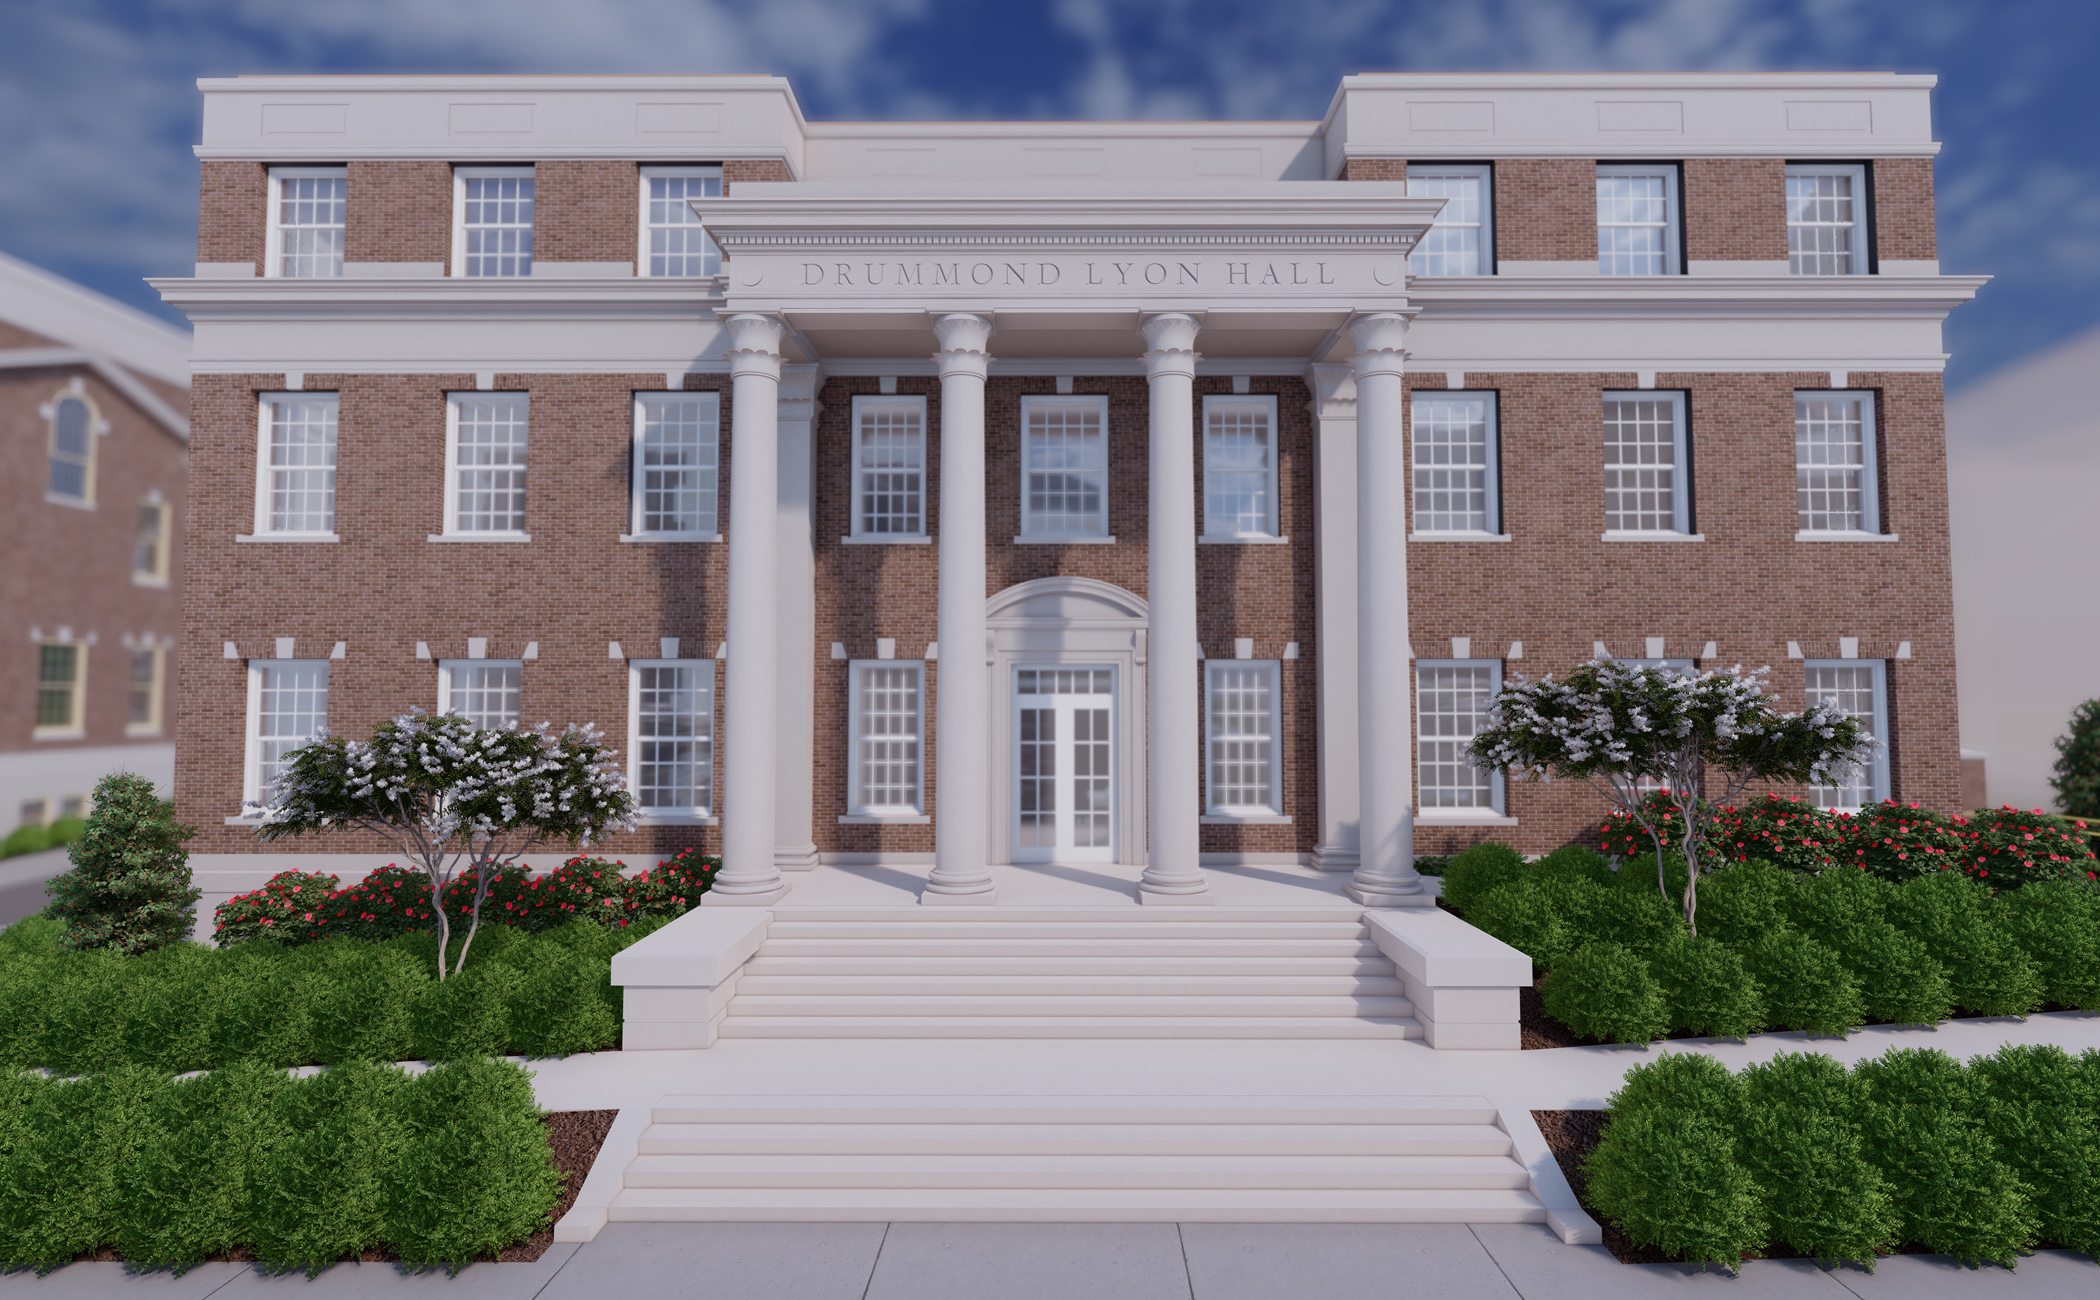 A rendering of Drummond Lyon Hall